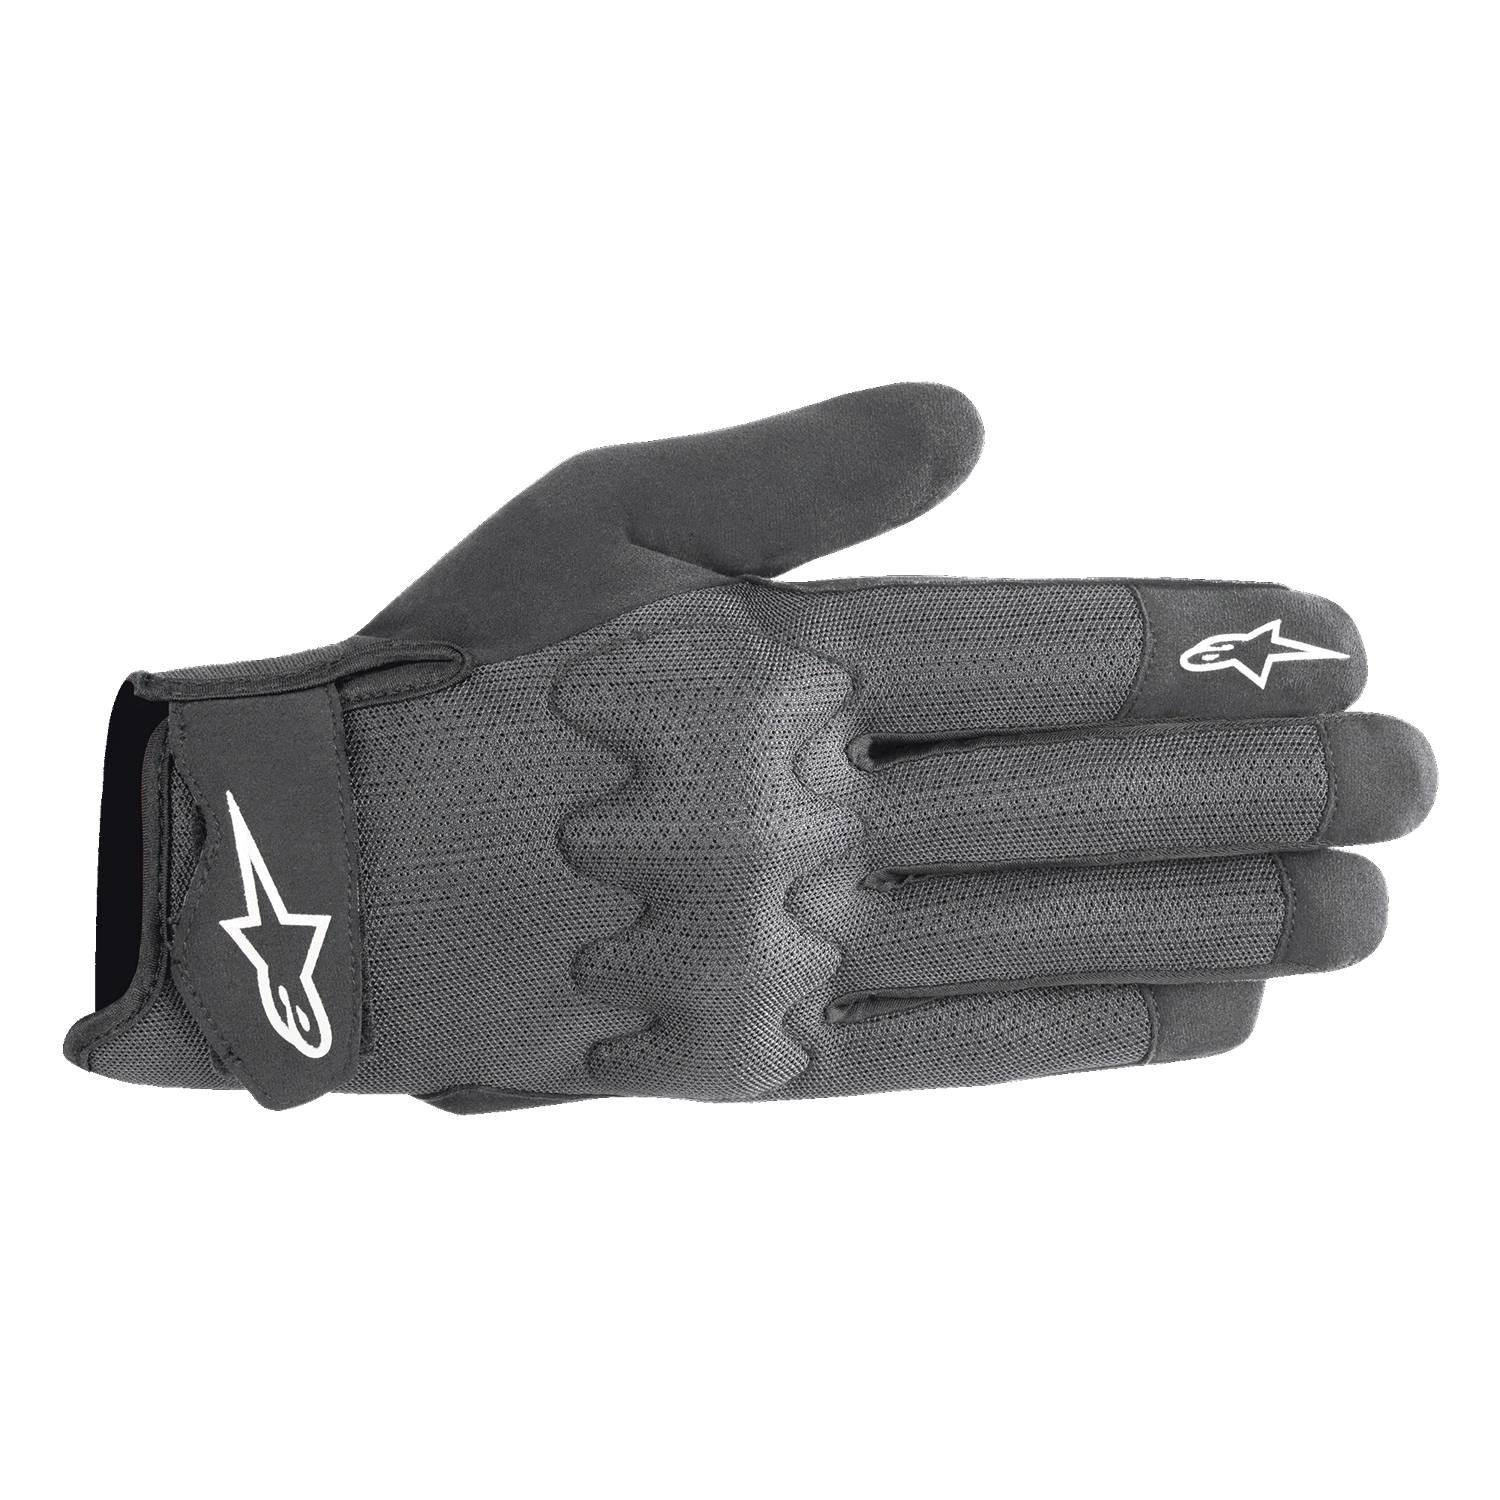 Image of EU Alpinestars Stated Air Gloves Black Silver Taille 3XL